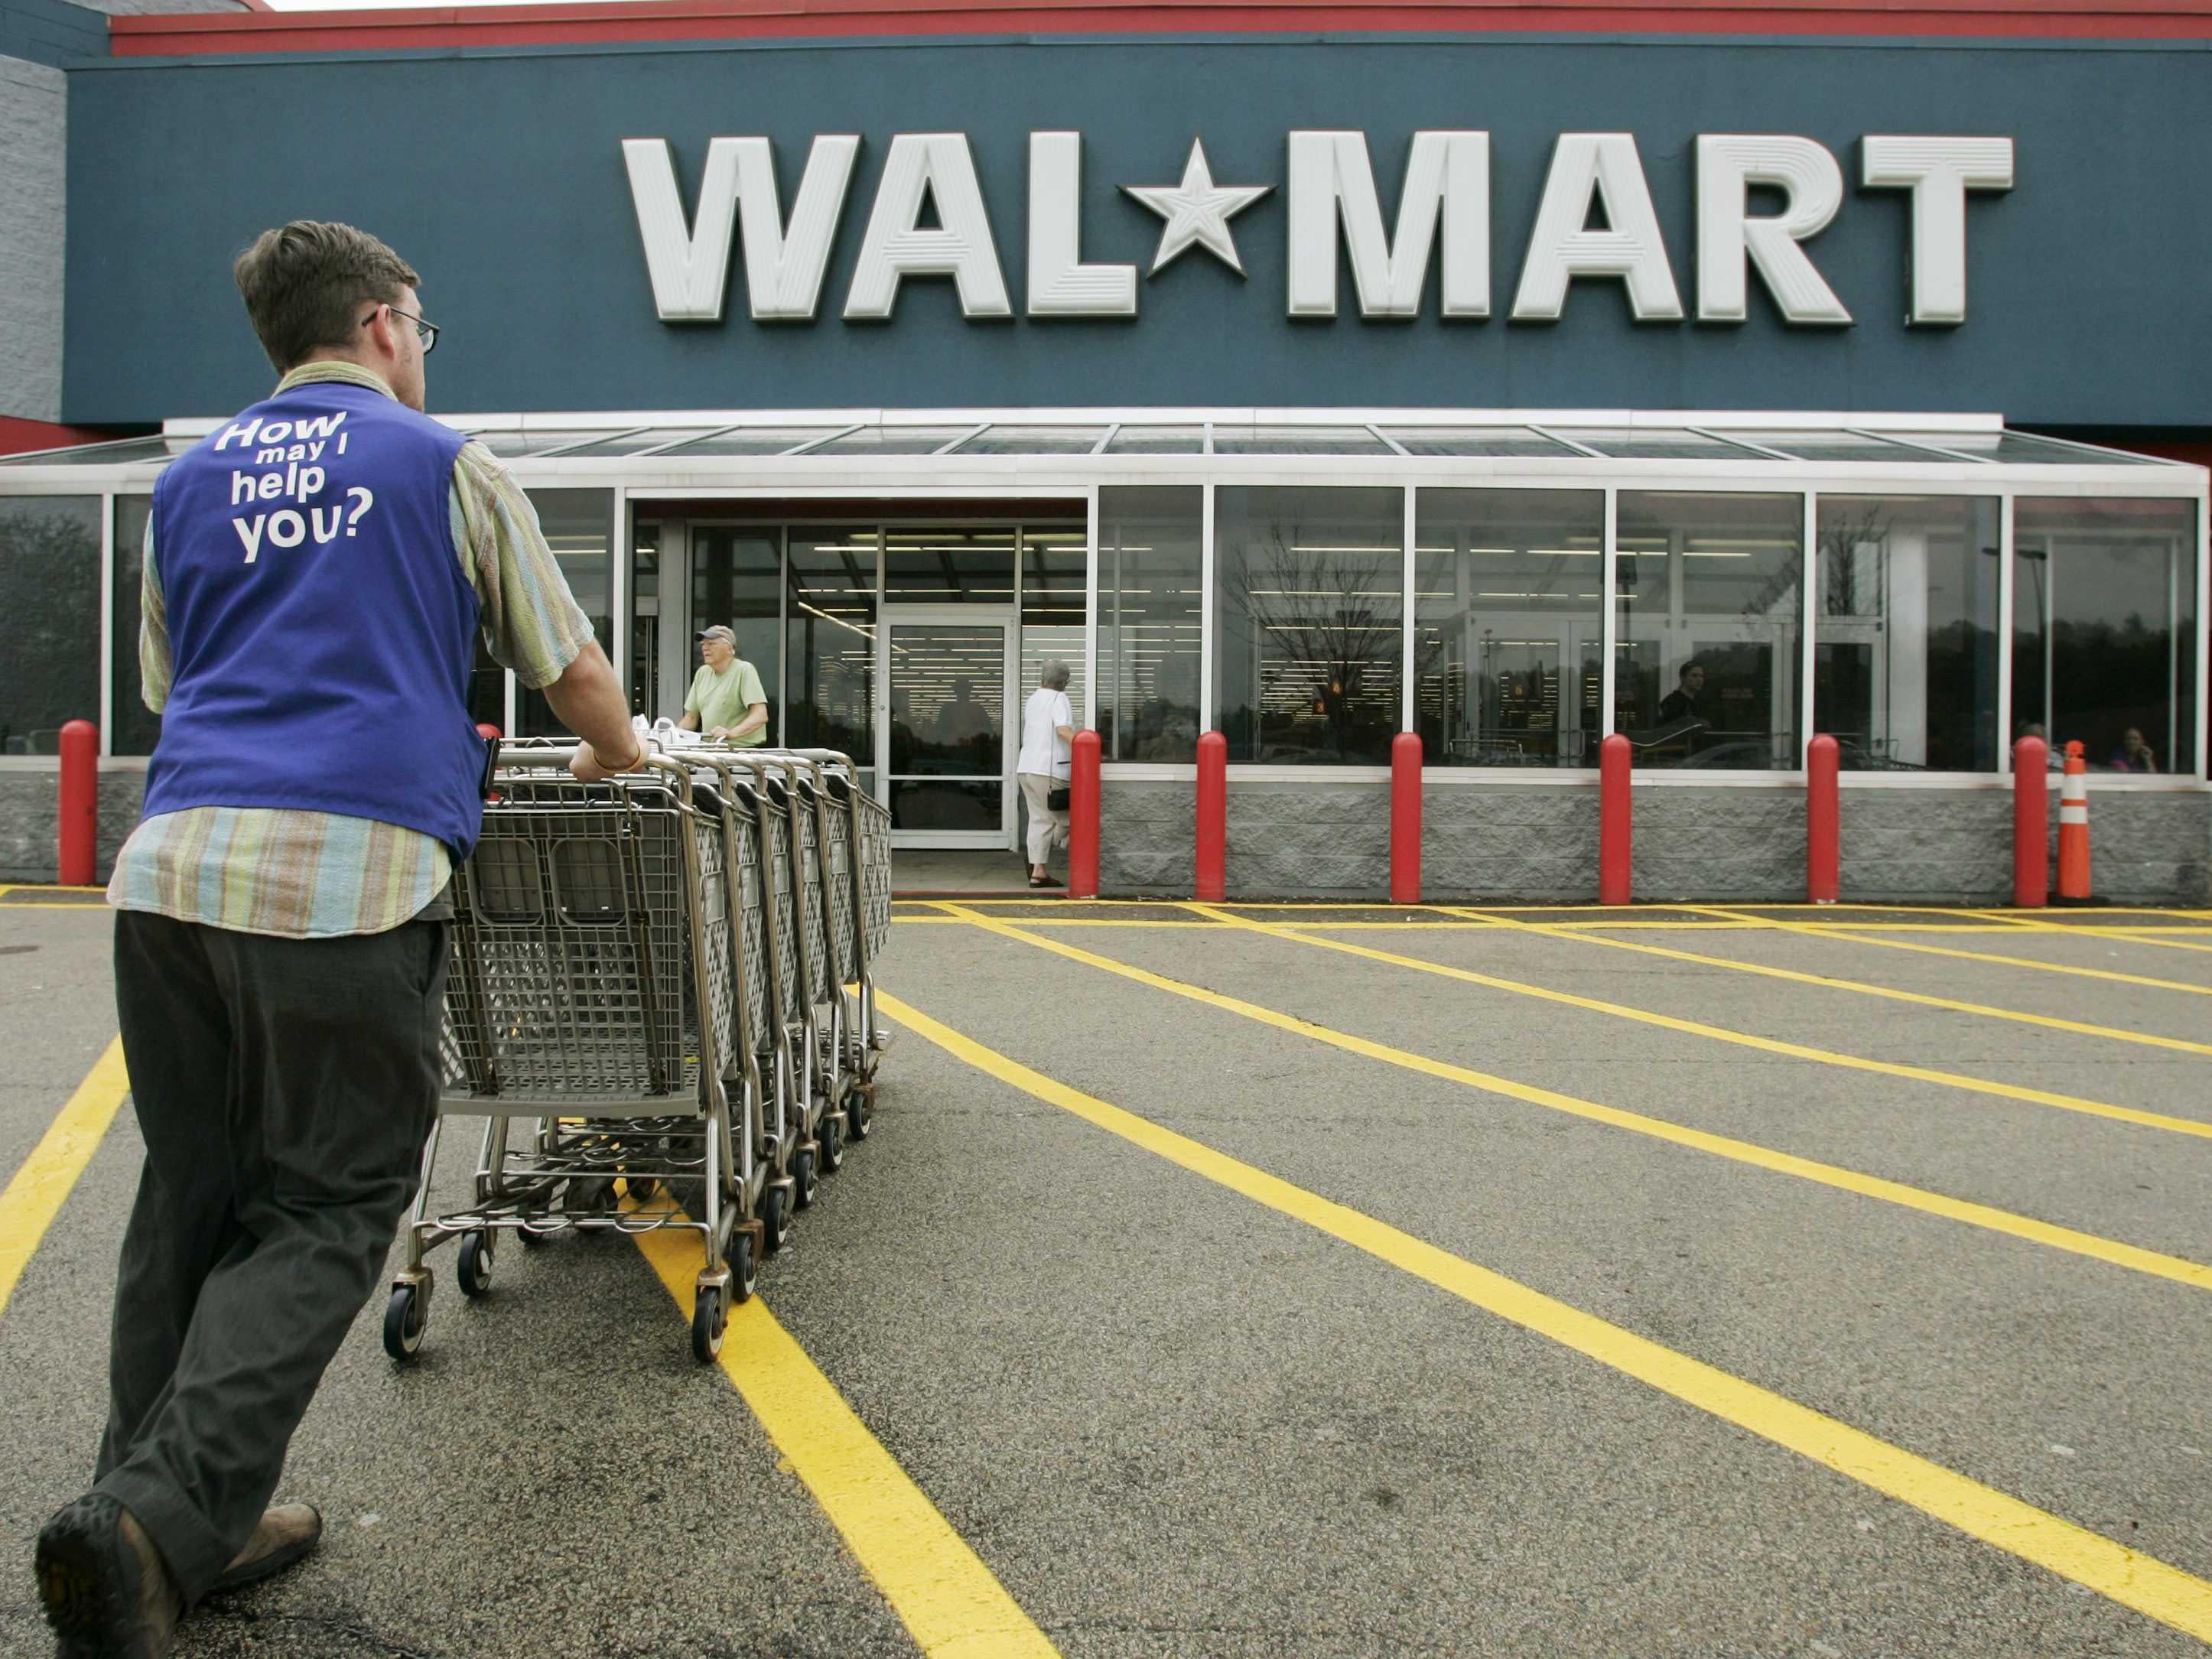 Walmart is closing hundreds of stores and laying off thousands of